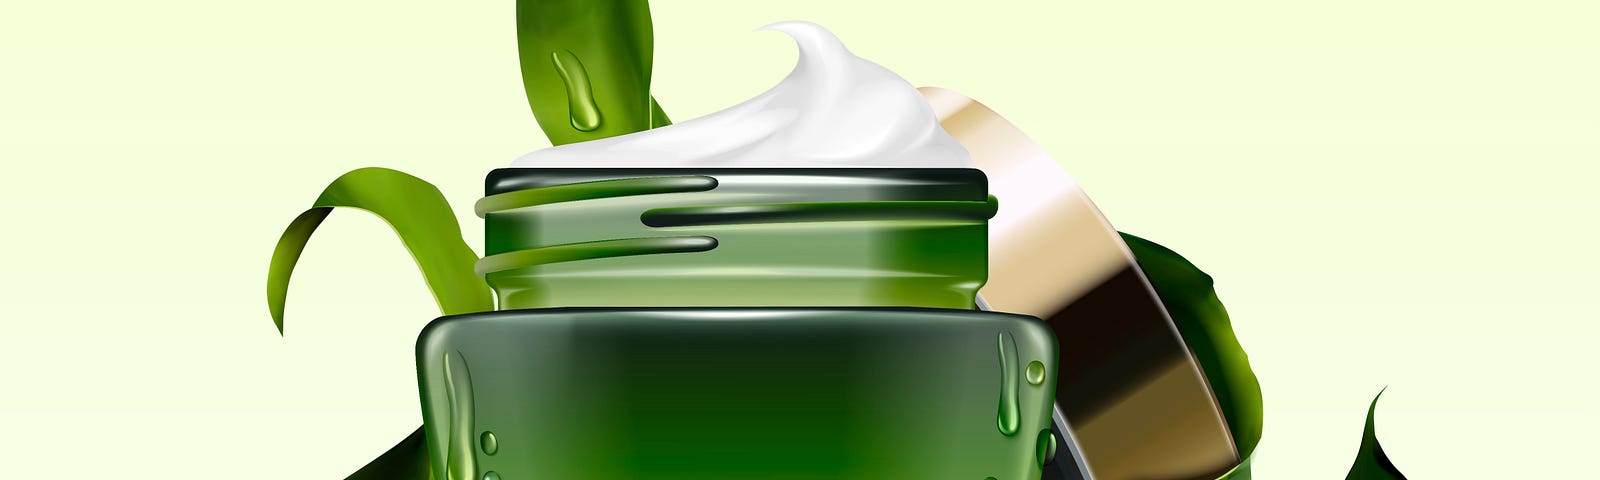 Illustration of a jar with cream and seaweed around it